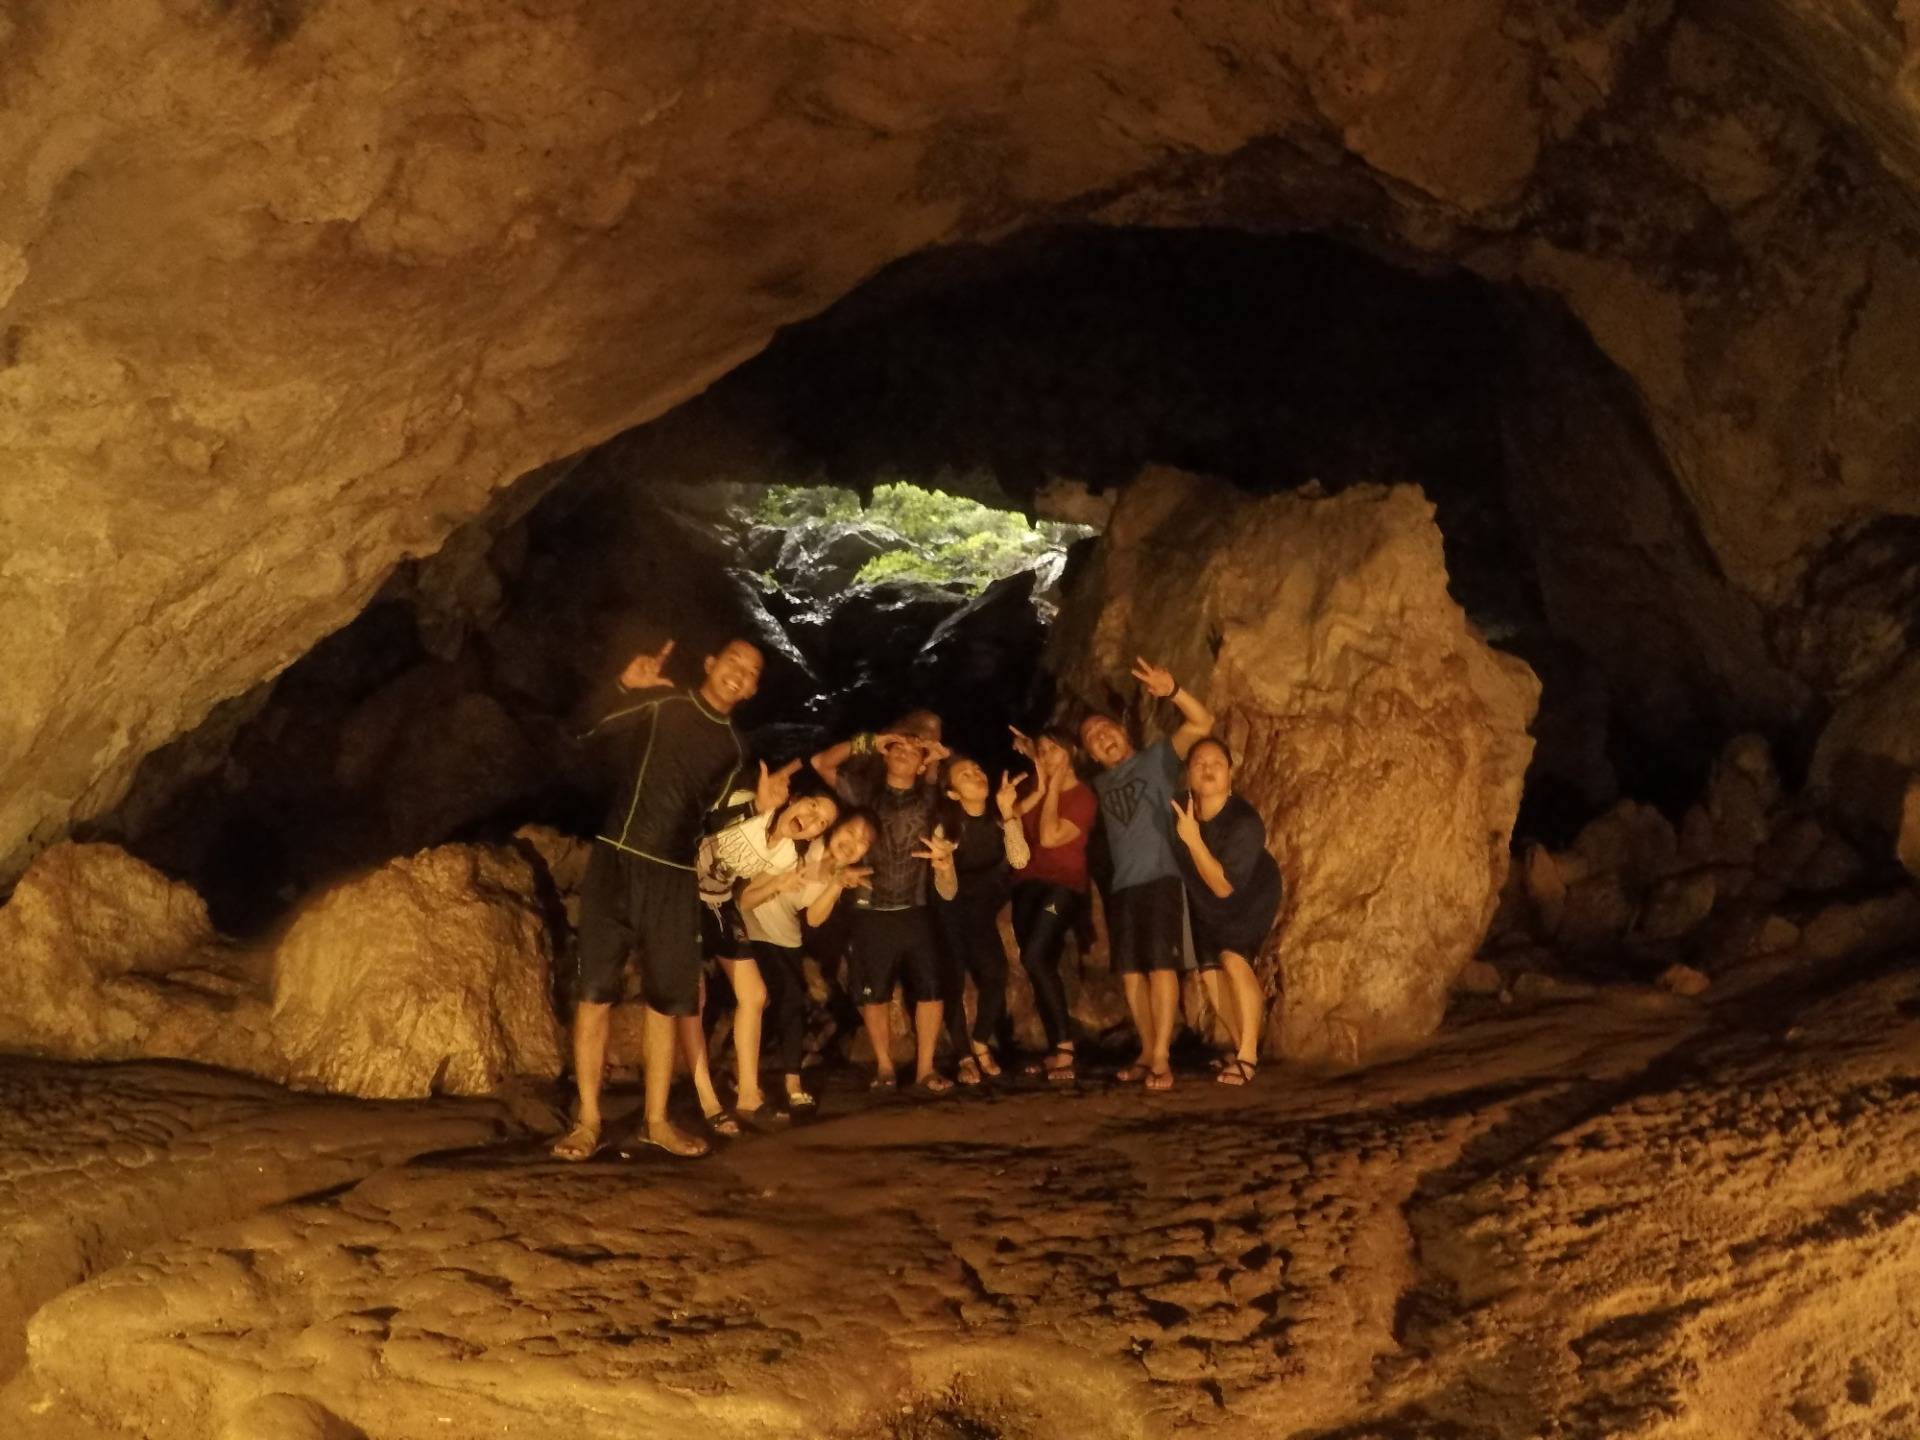 You can see the mouth of the cave's entrance behind us. 